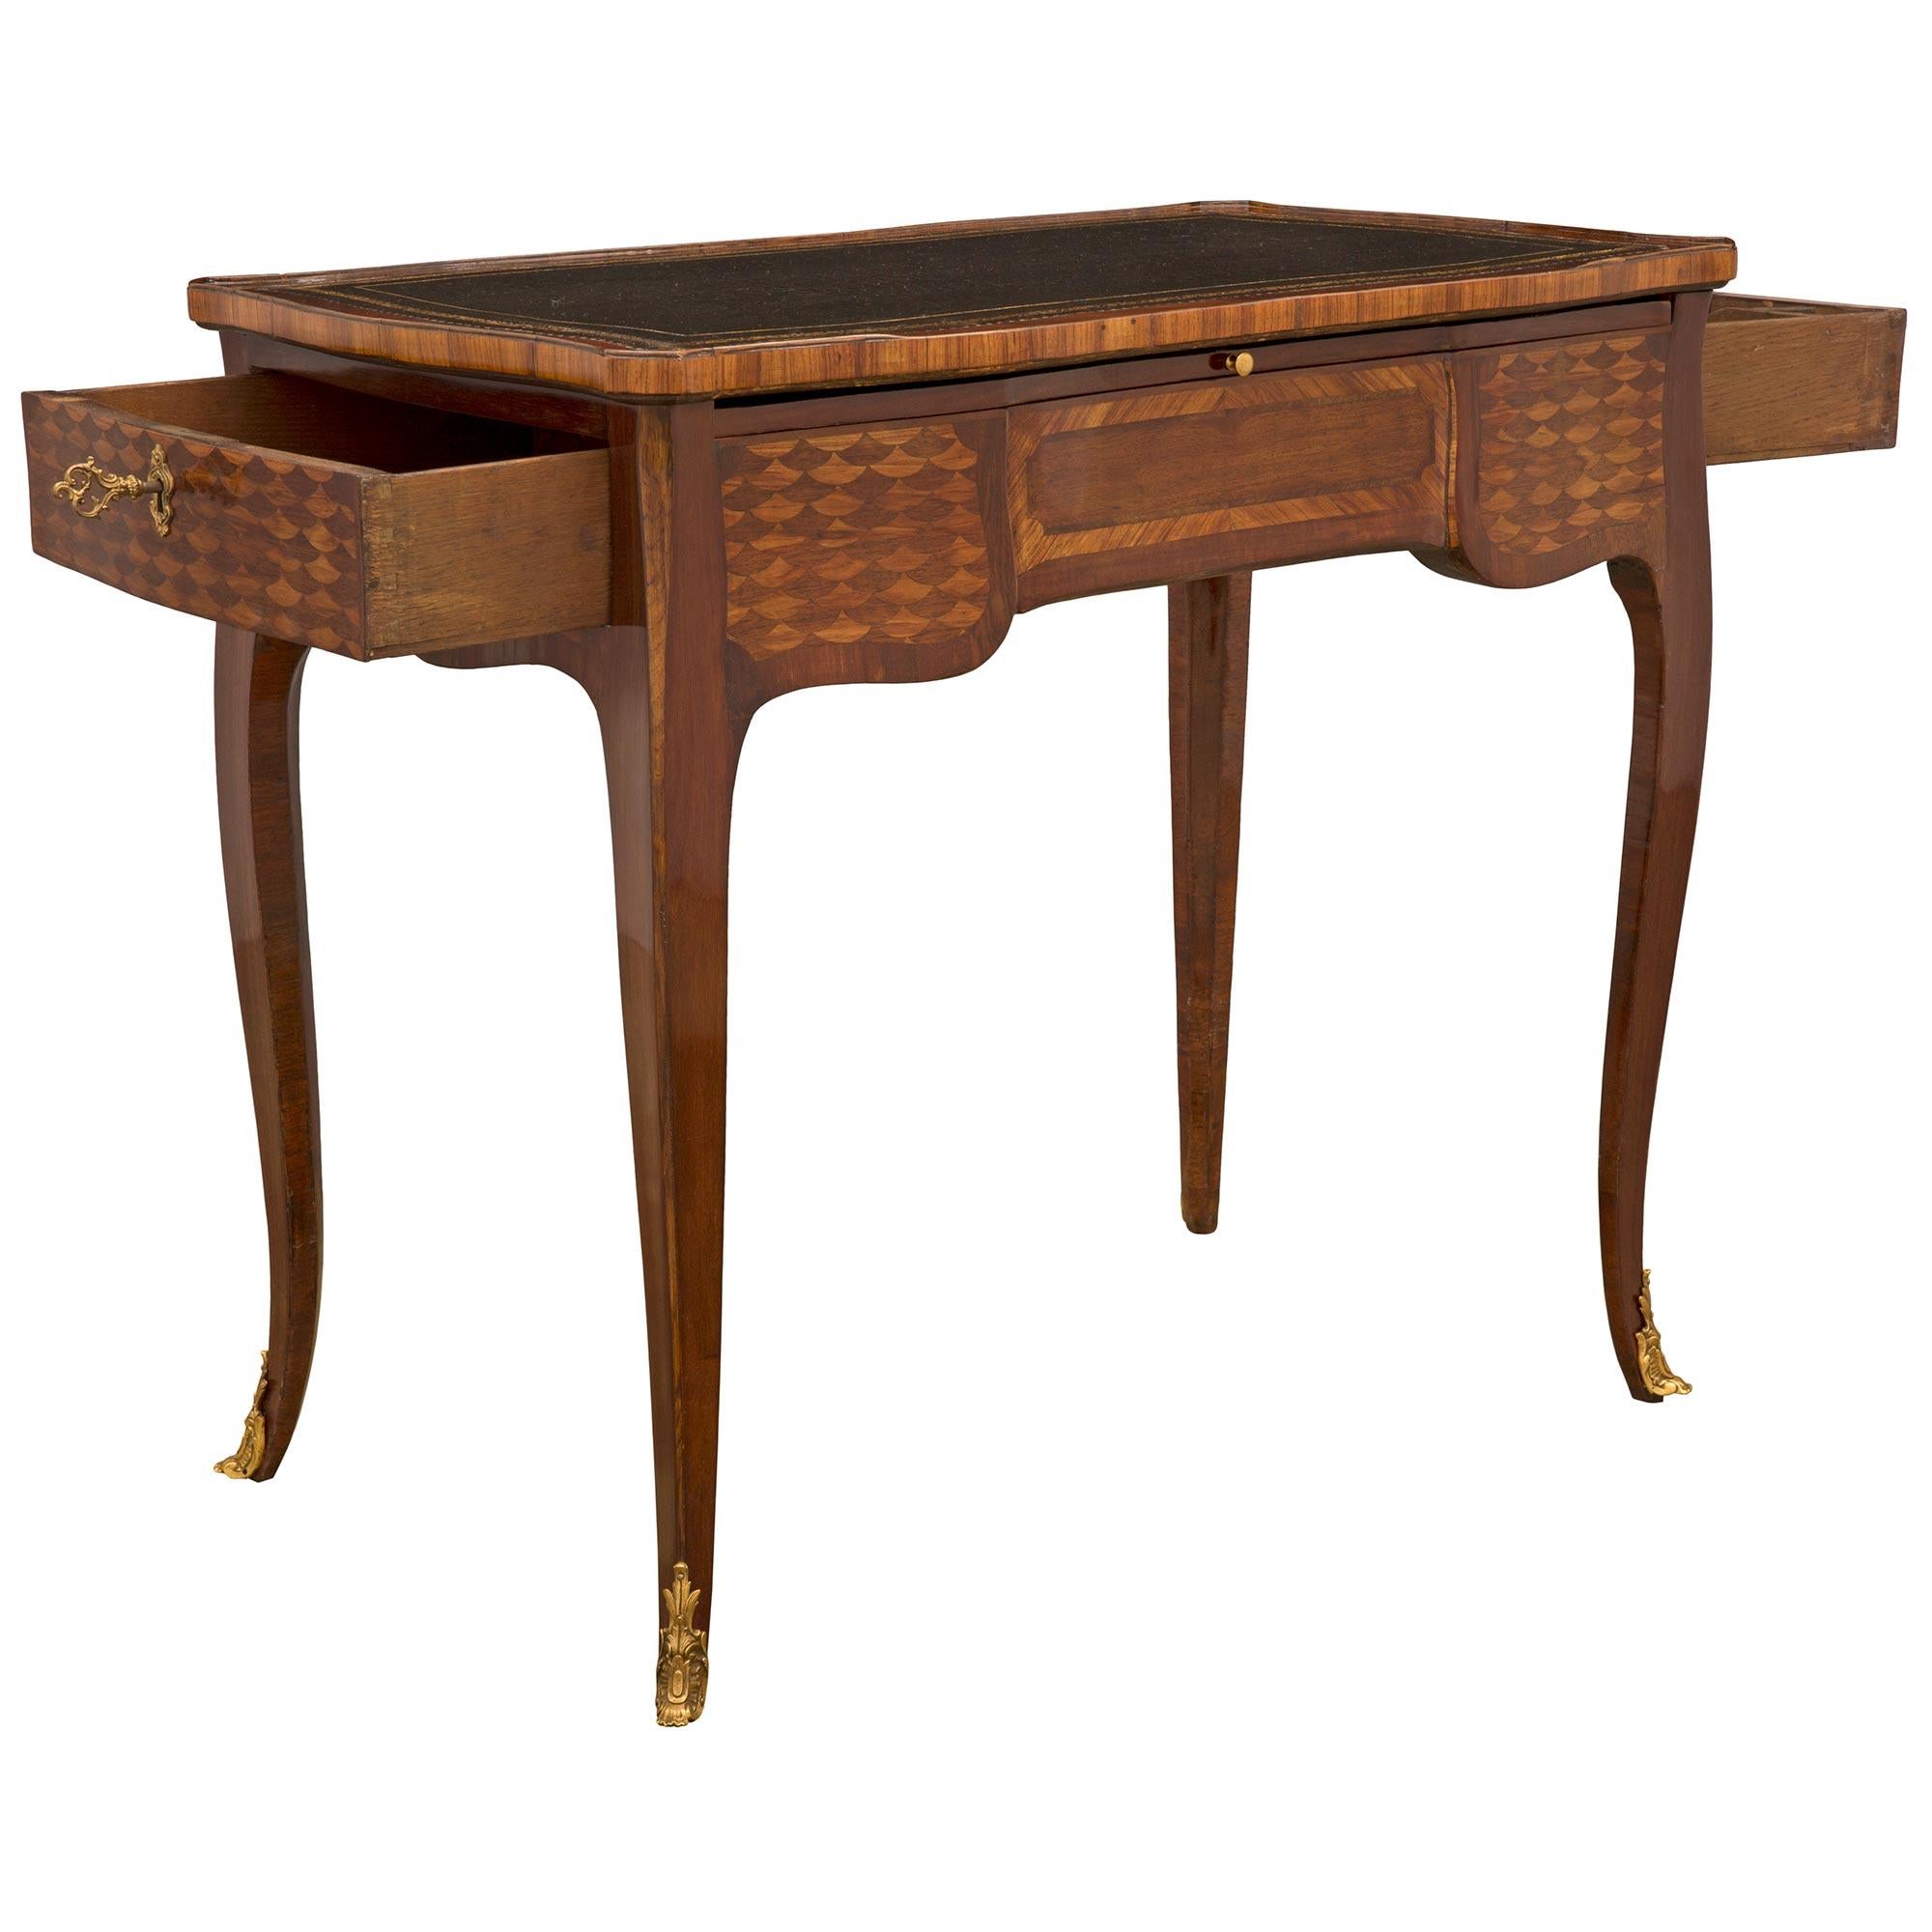 French 18th Century Louis XV Period Kingwood And Tulipwood Desk In Good Condition For Sale In West Palm Beach, FL